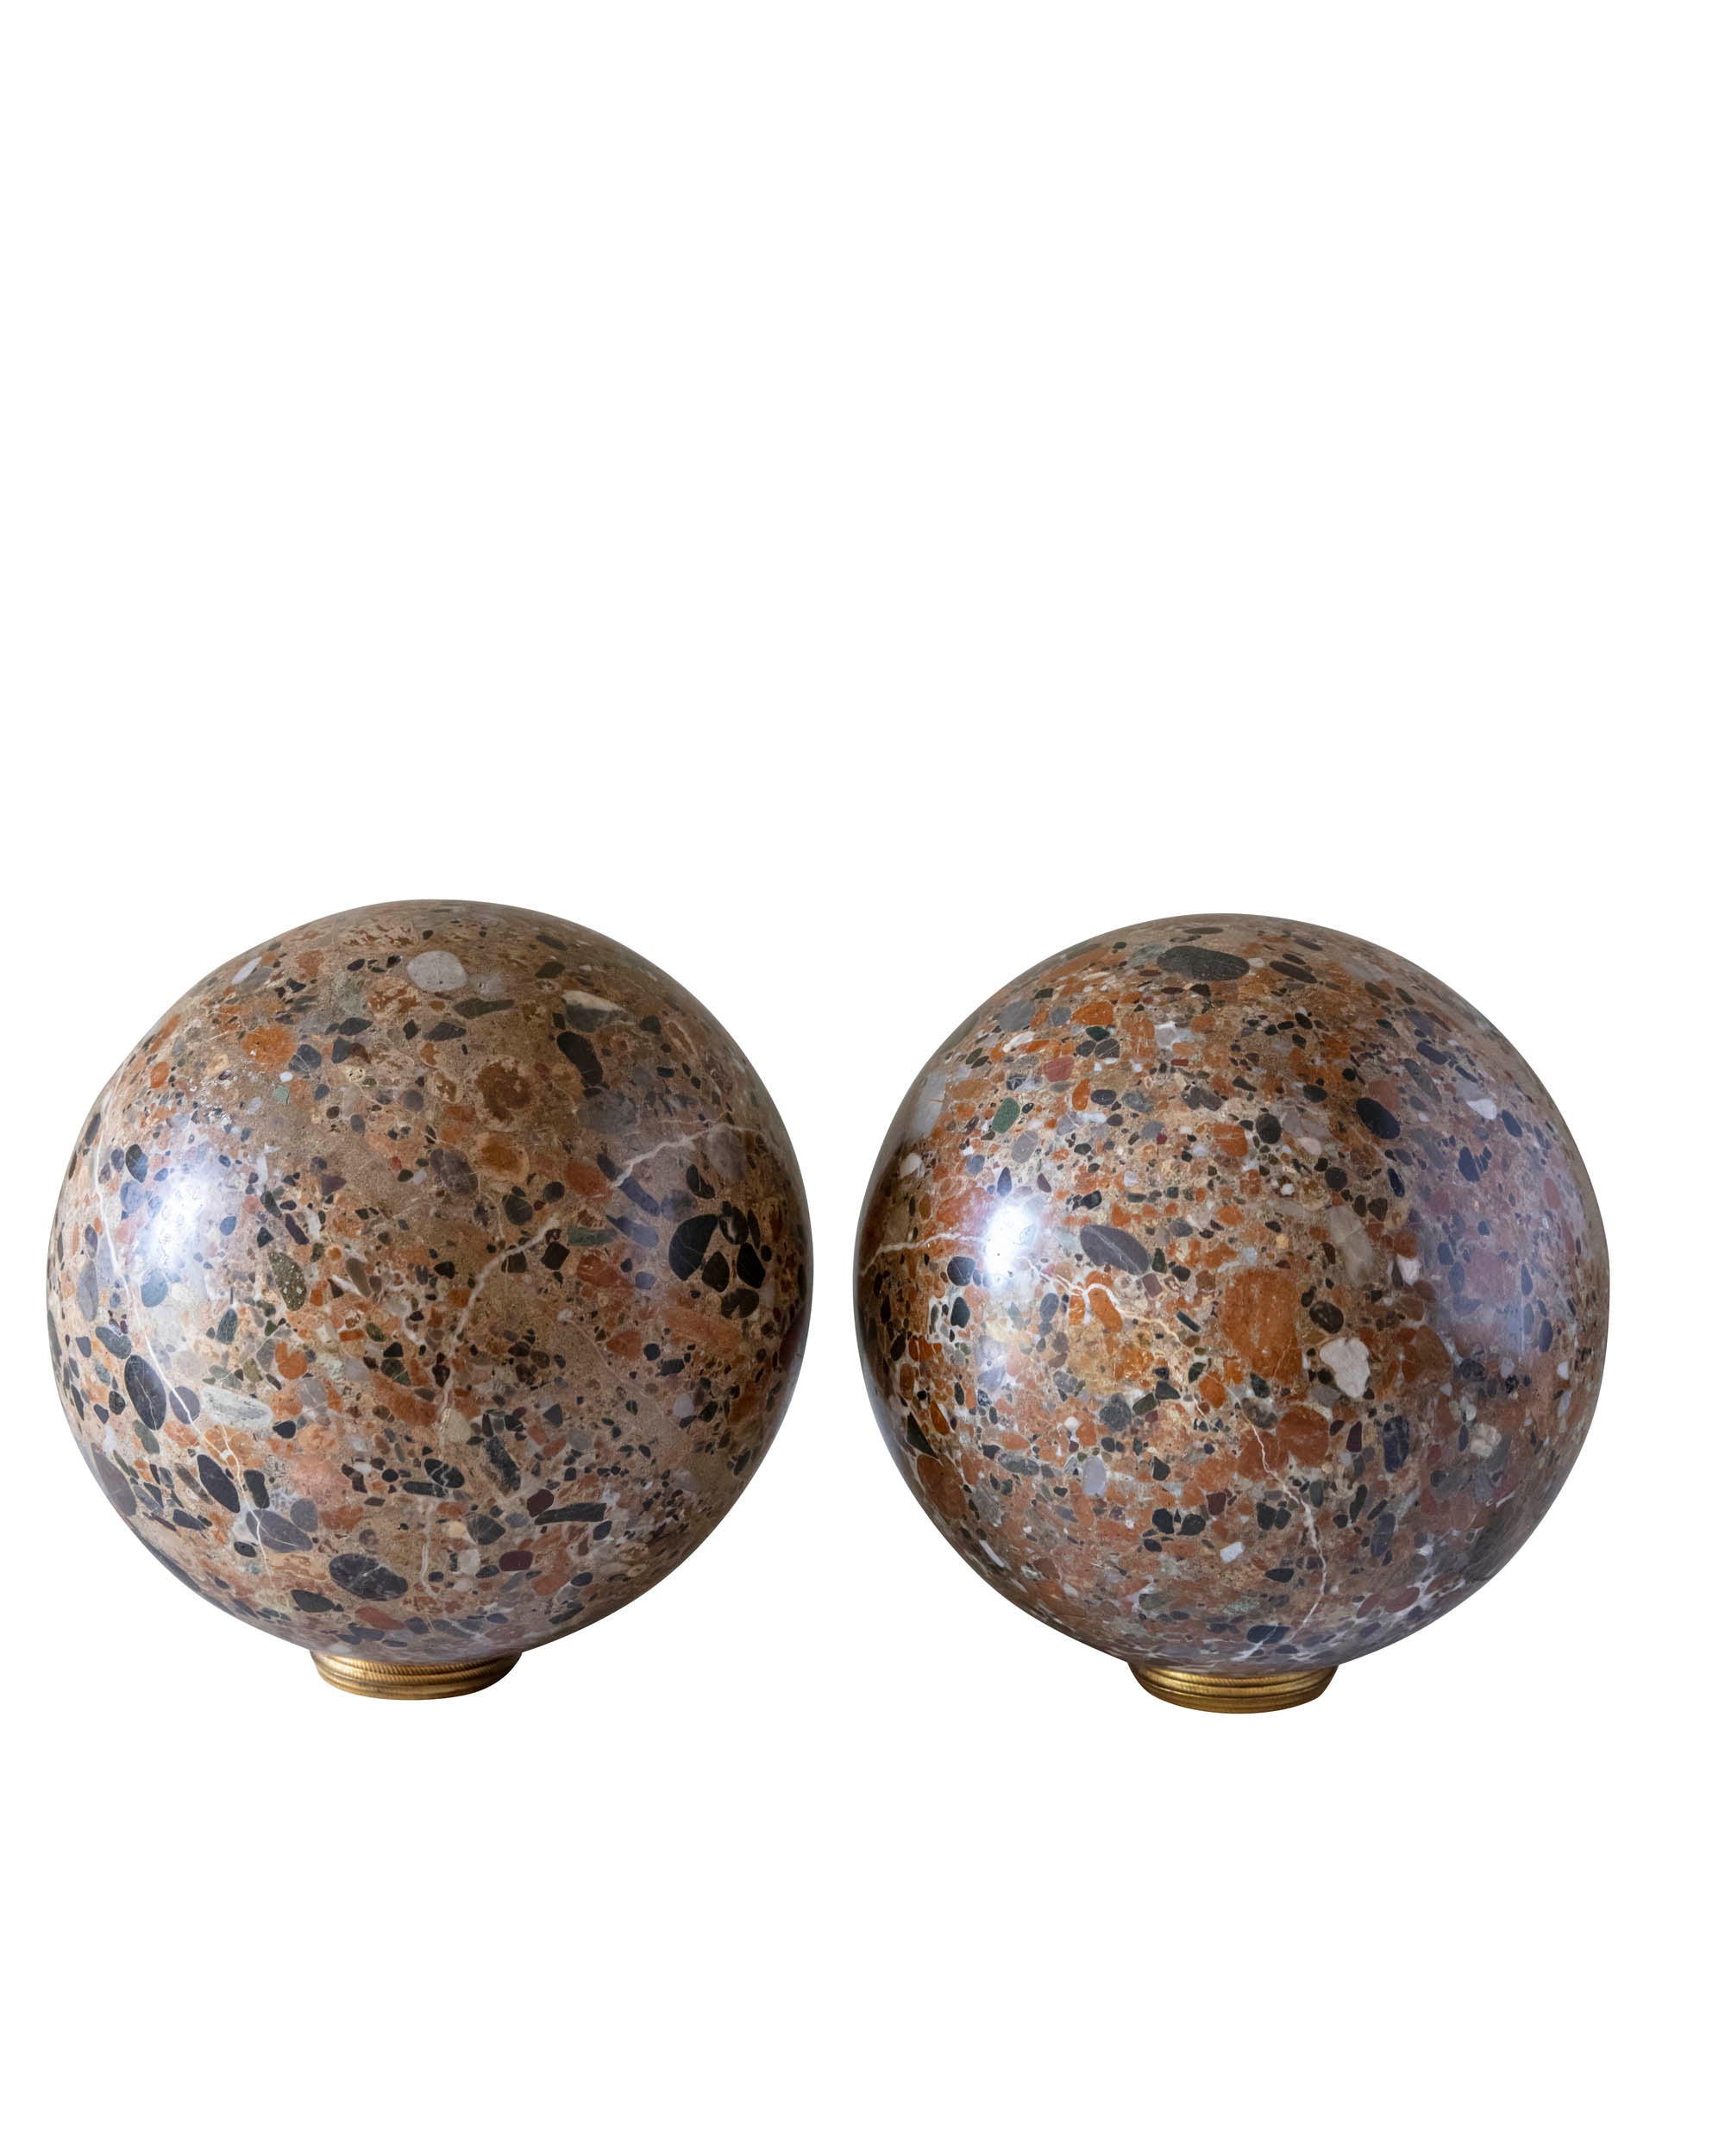 Pair of large marble balls carved by hand